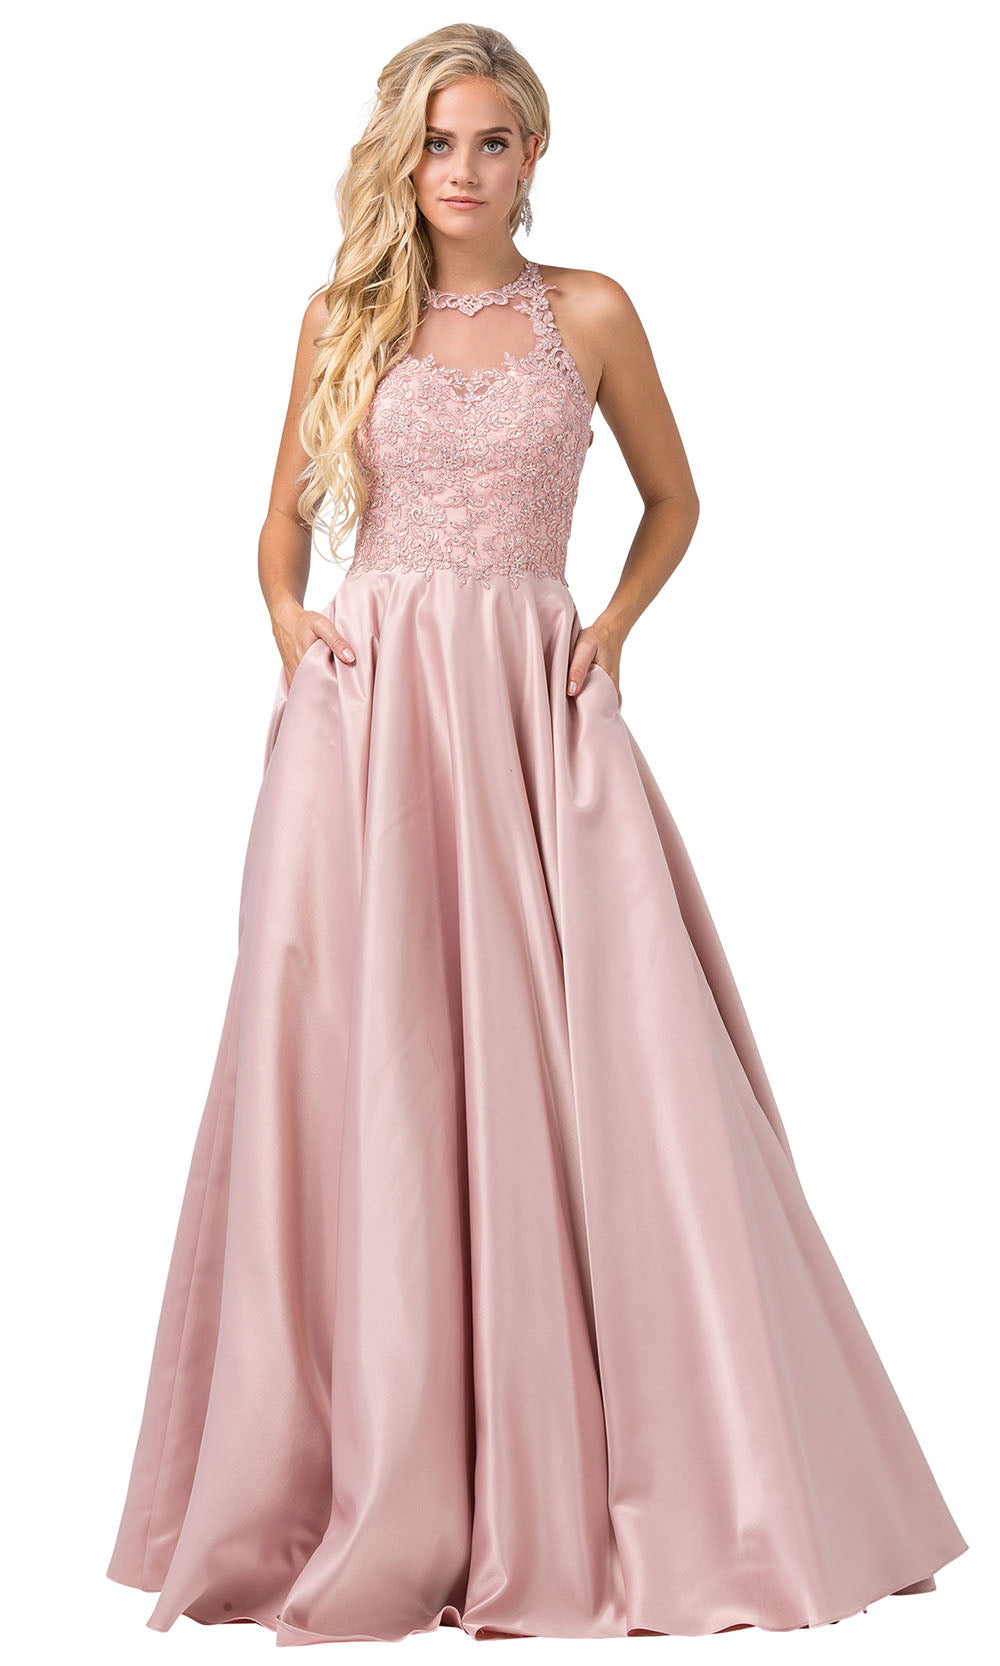 Dancing Queen - 2625 Embroidered Halter Neck A-Line Dress In Pink and Gold